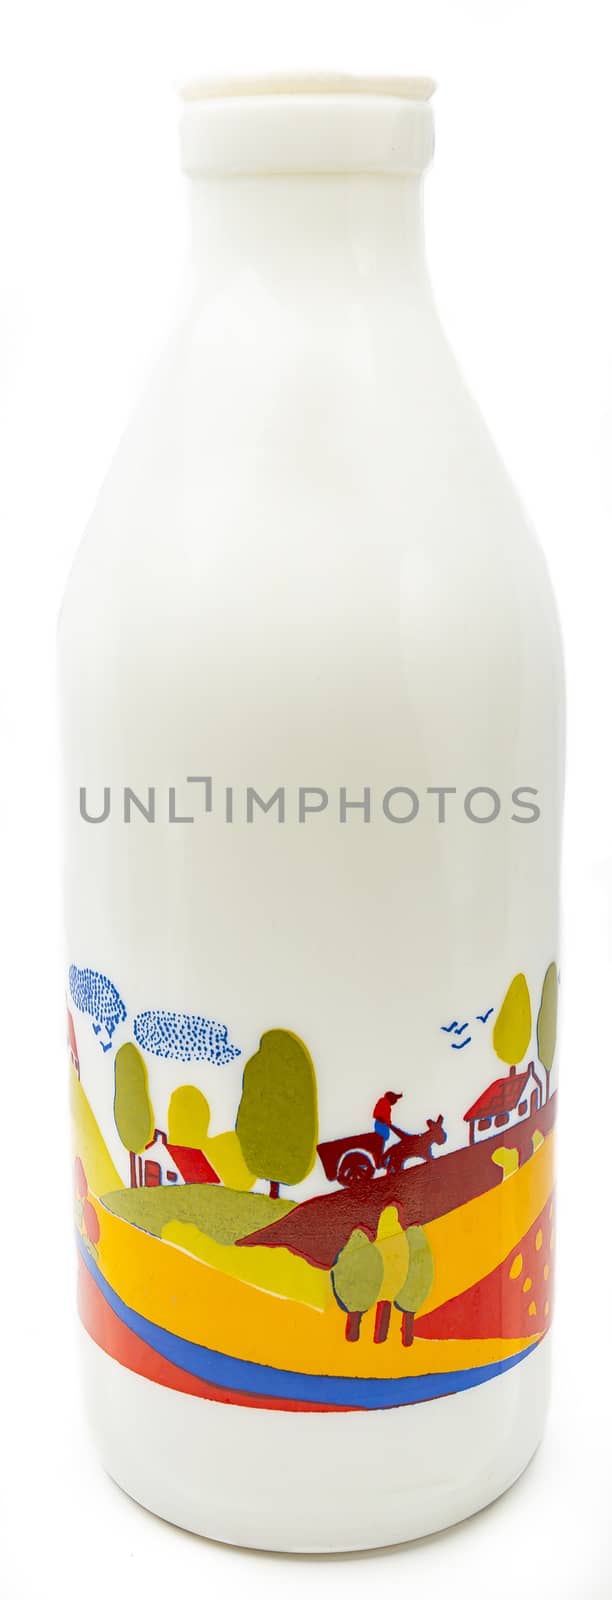 Milk bottle with country side design